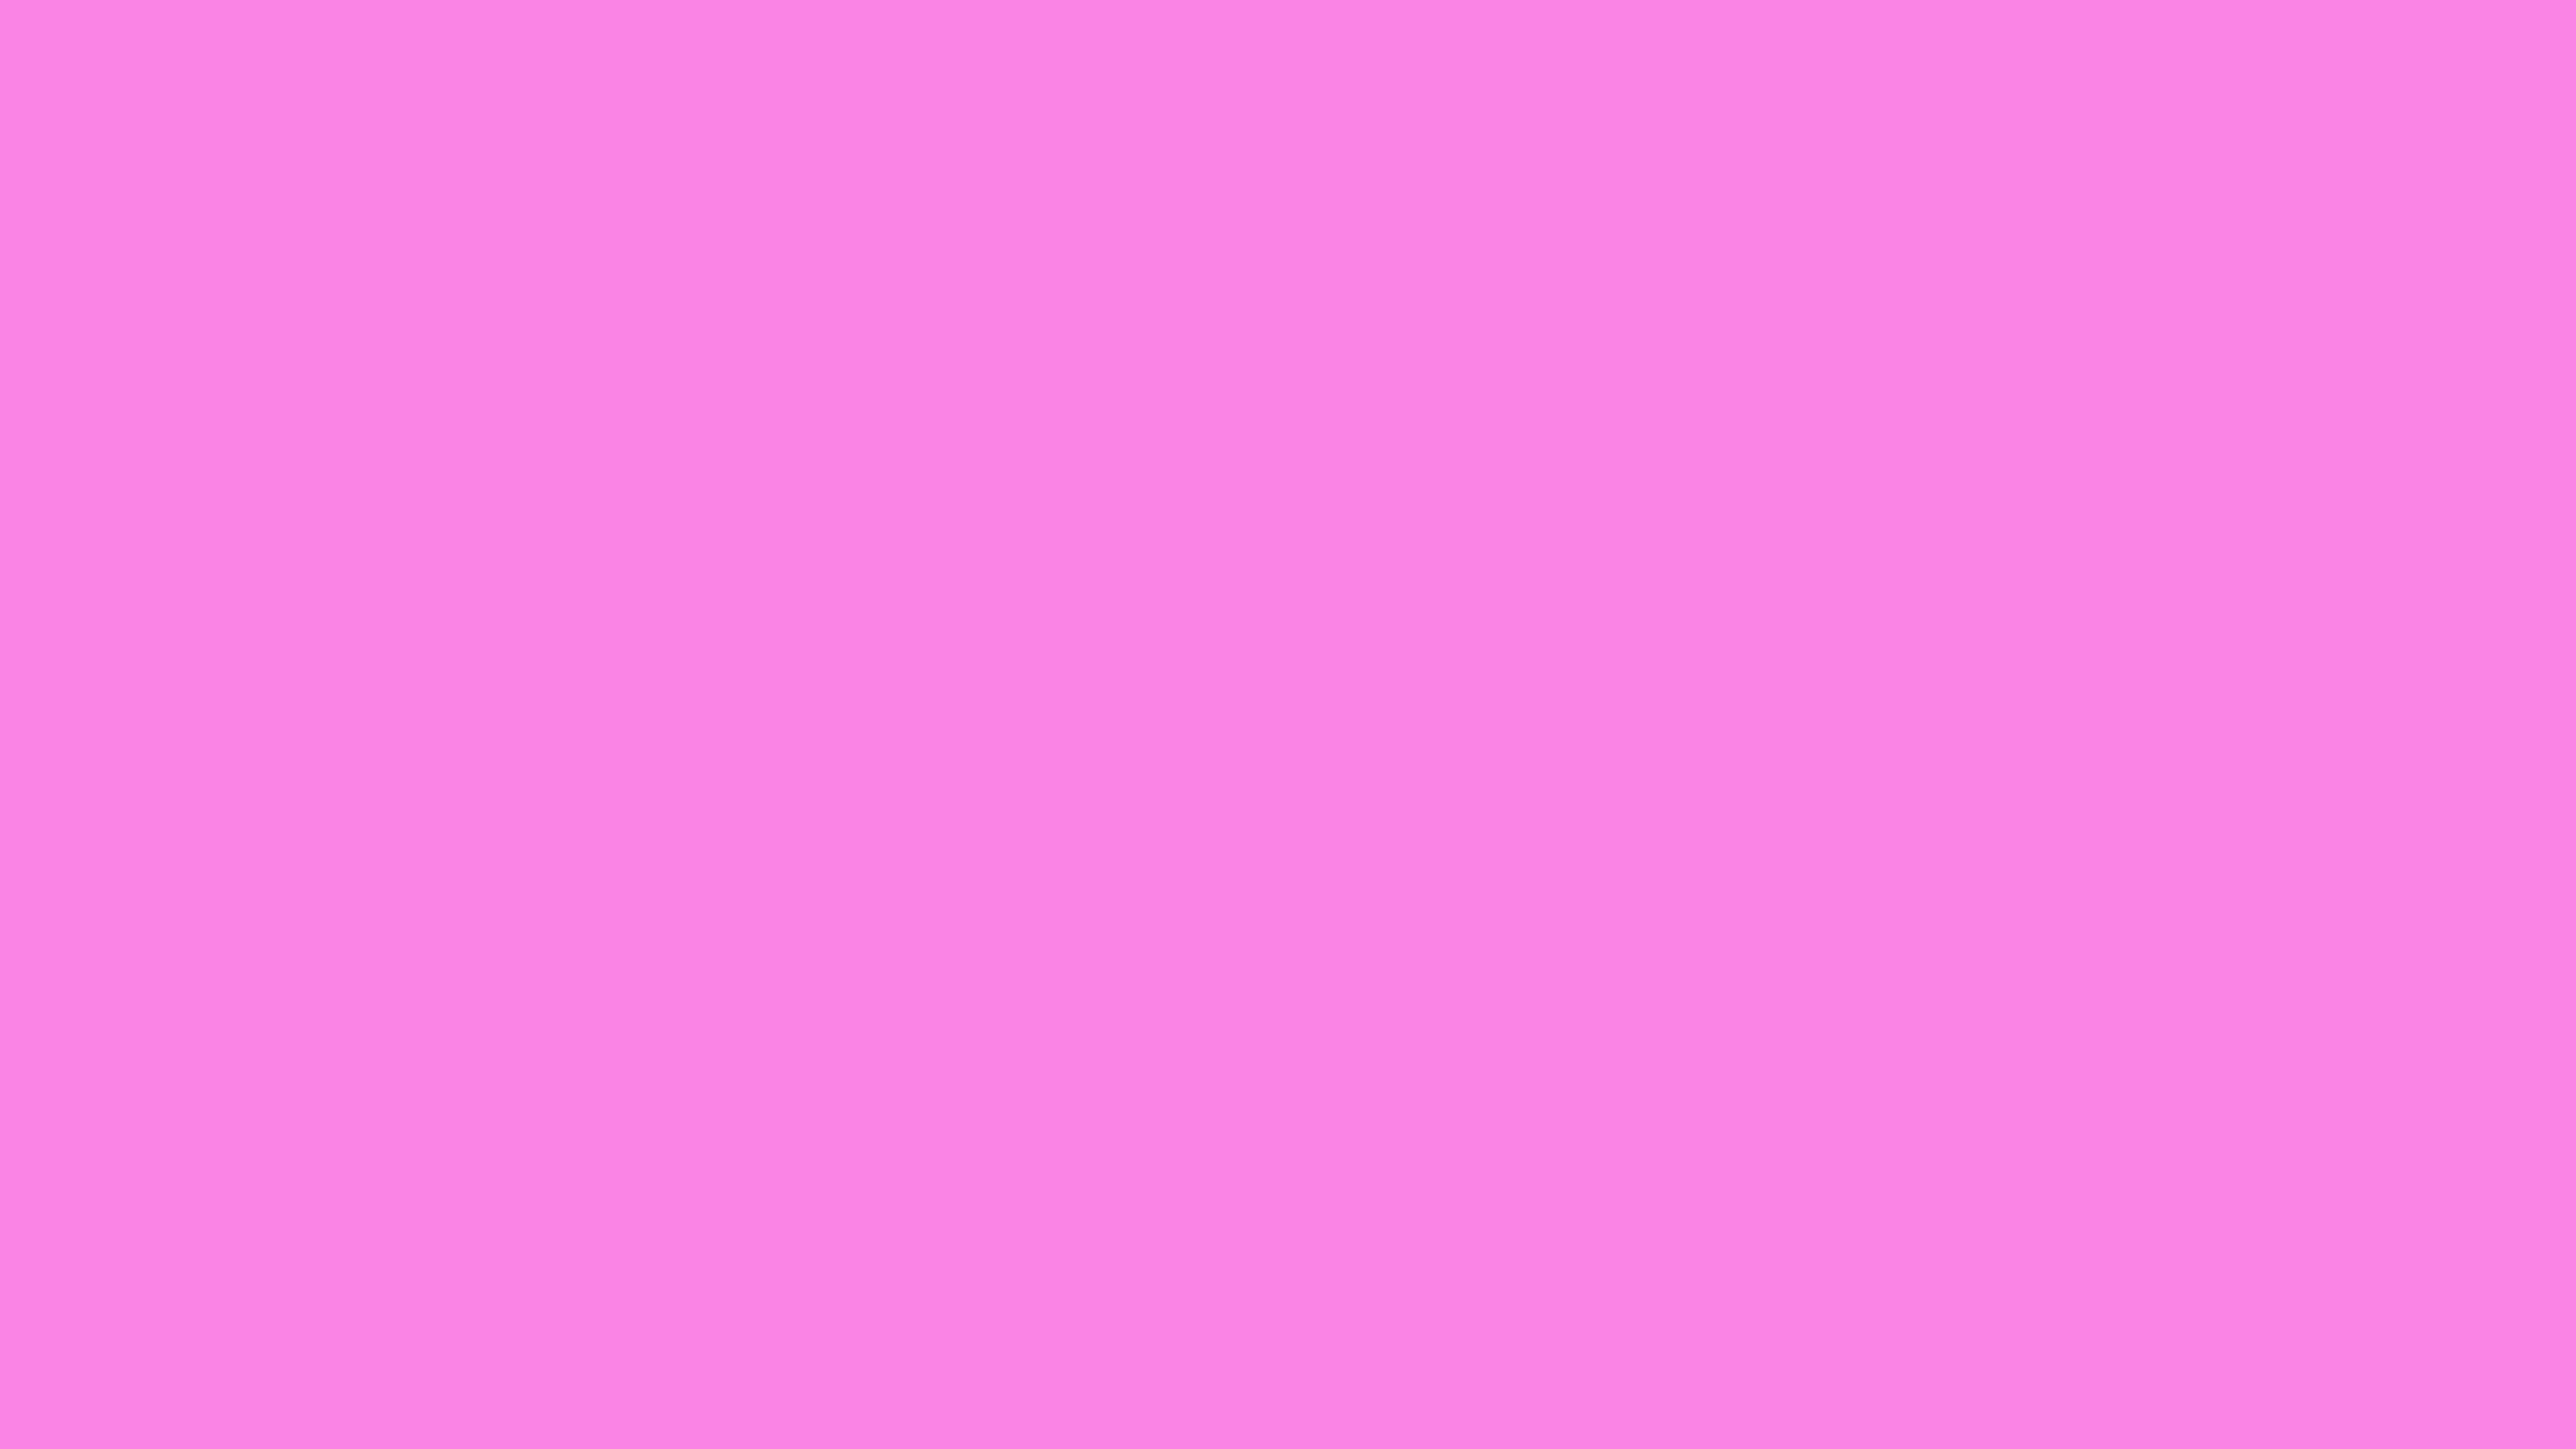 7680x4320 Pale Magenta Solid Color Background